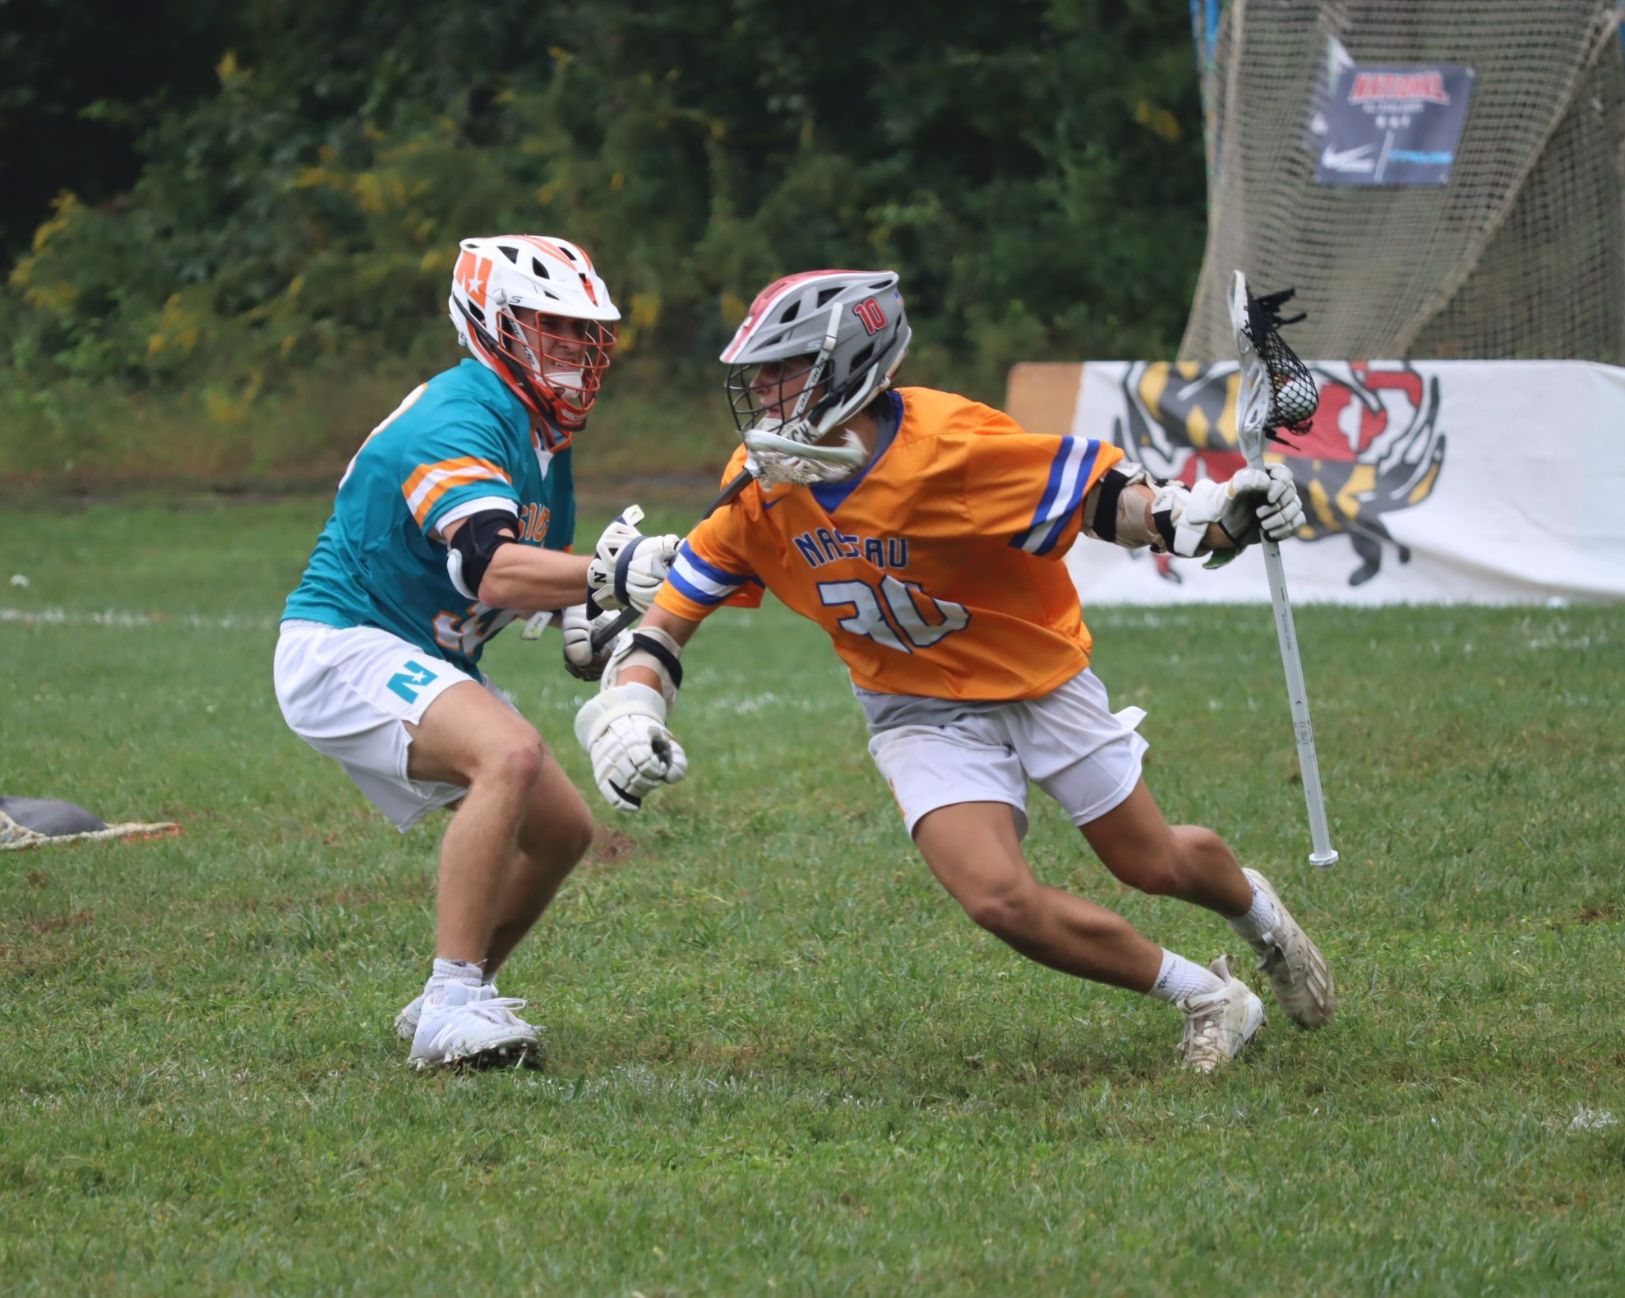 Matt Caputo, 2022 Standout Lacrosse Player at the National All Star Games in Baltimore, Maryland